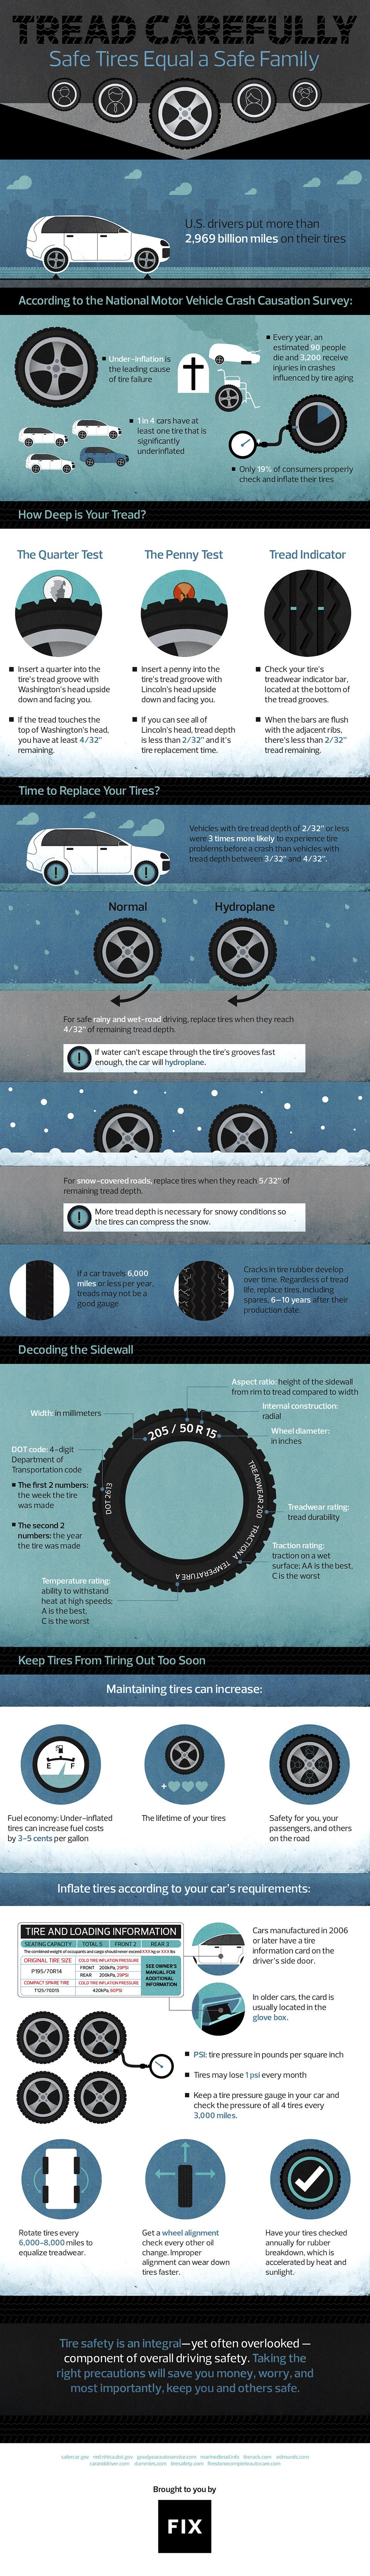 tire safety infographic